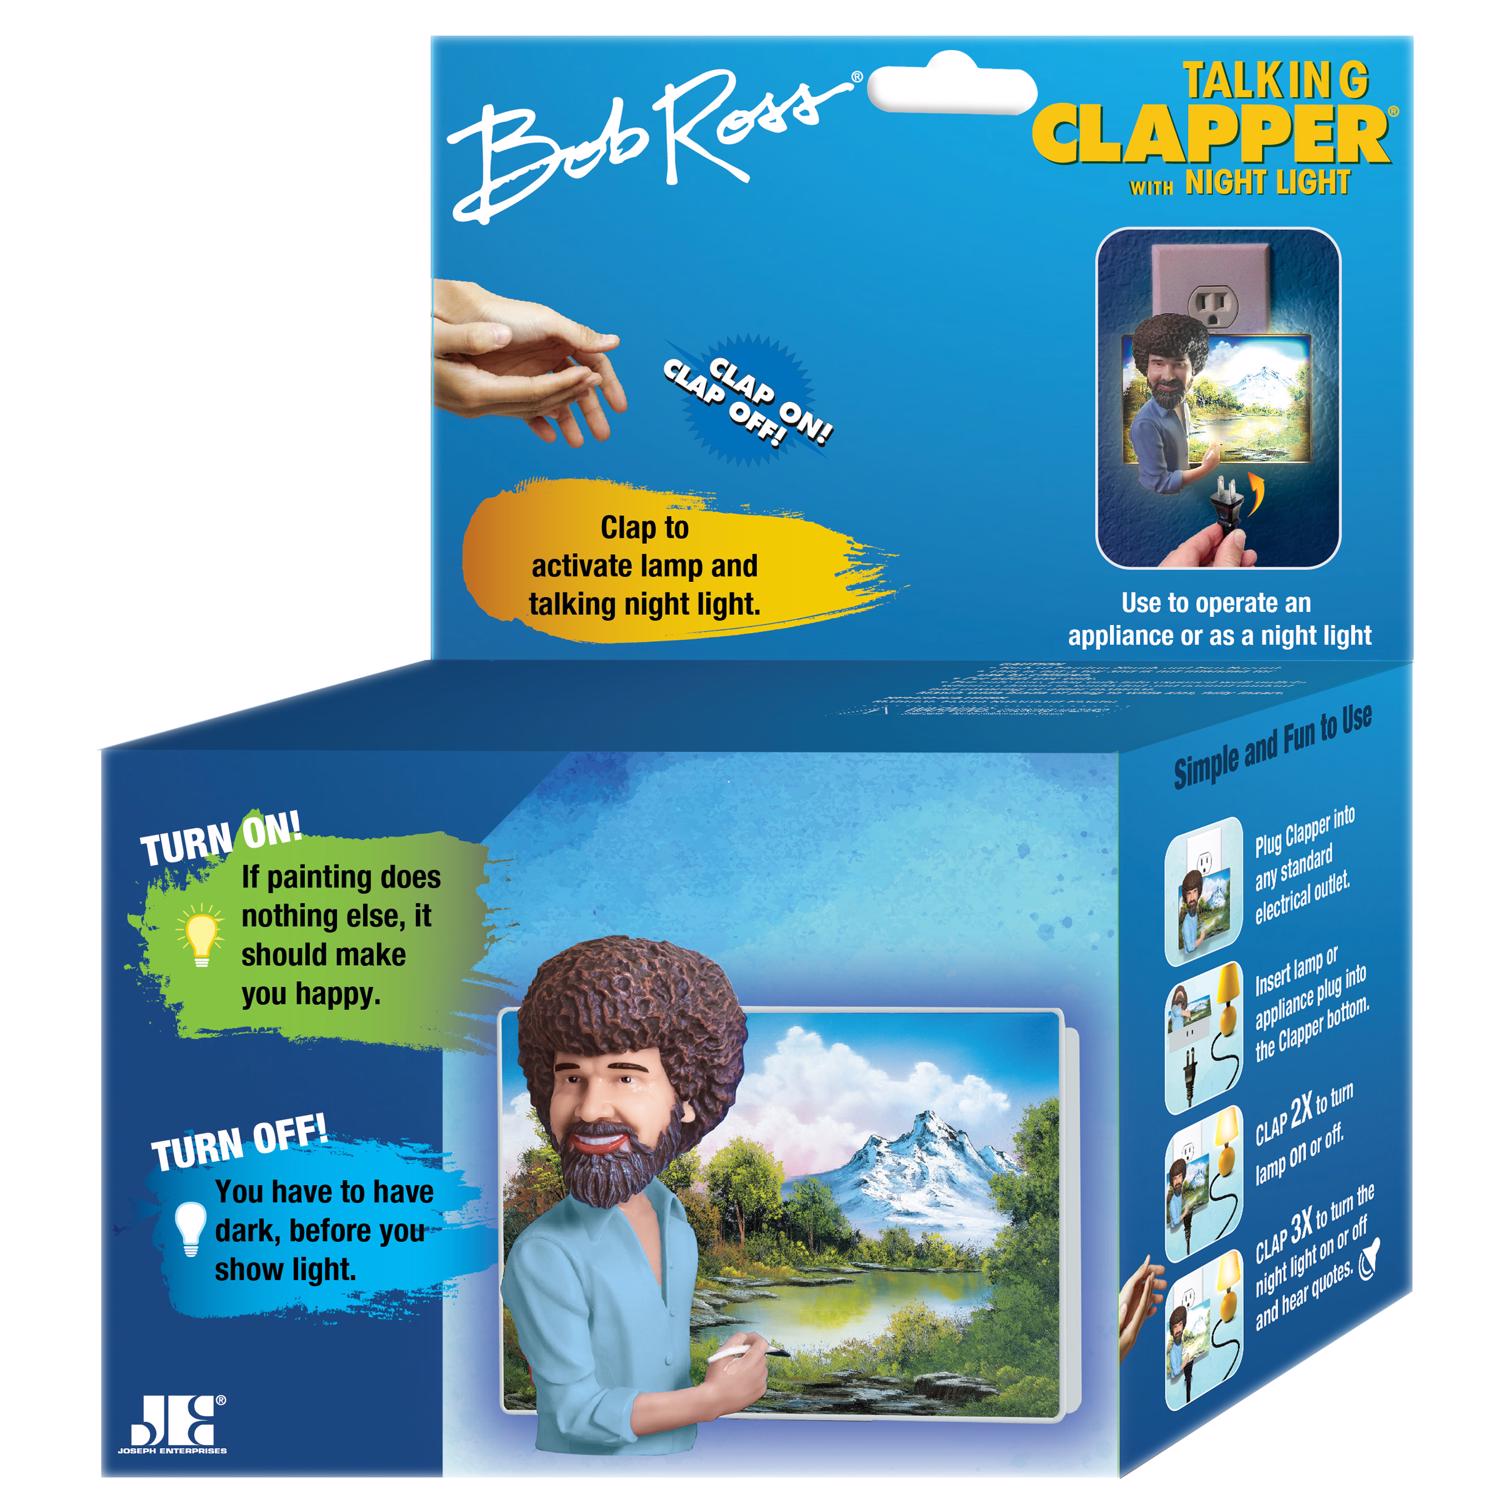 Photos - Other interior and decor NECA Clapper Bob Ross Talking Clapper and Nightlight Plastic 1 pc CL835R12 